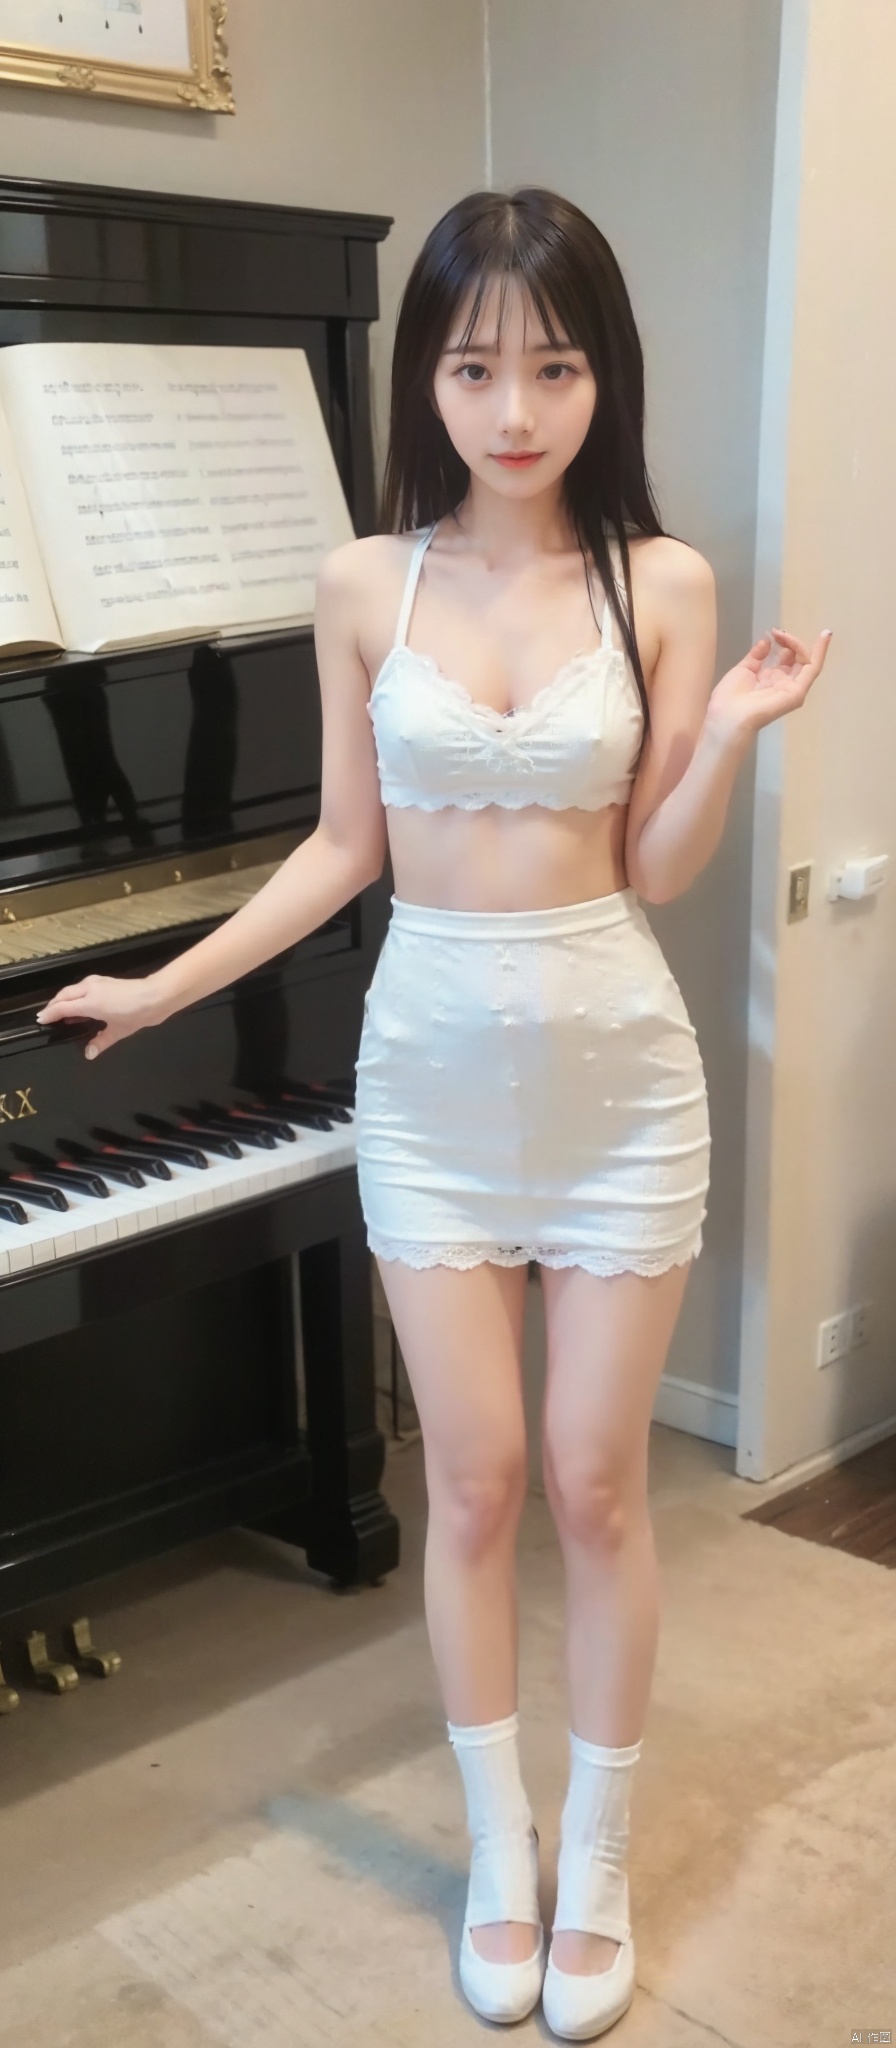  1girl, Lace skirt, ,,, small breasts,
, ,cum on legs,
, Getting undressed, ,,basement,
piano room,